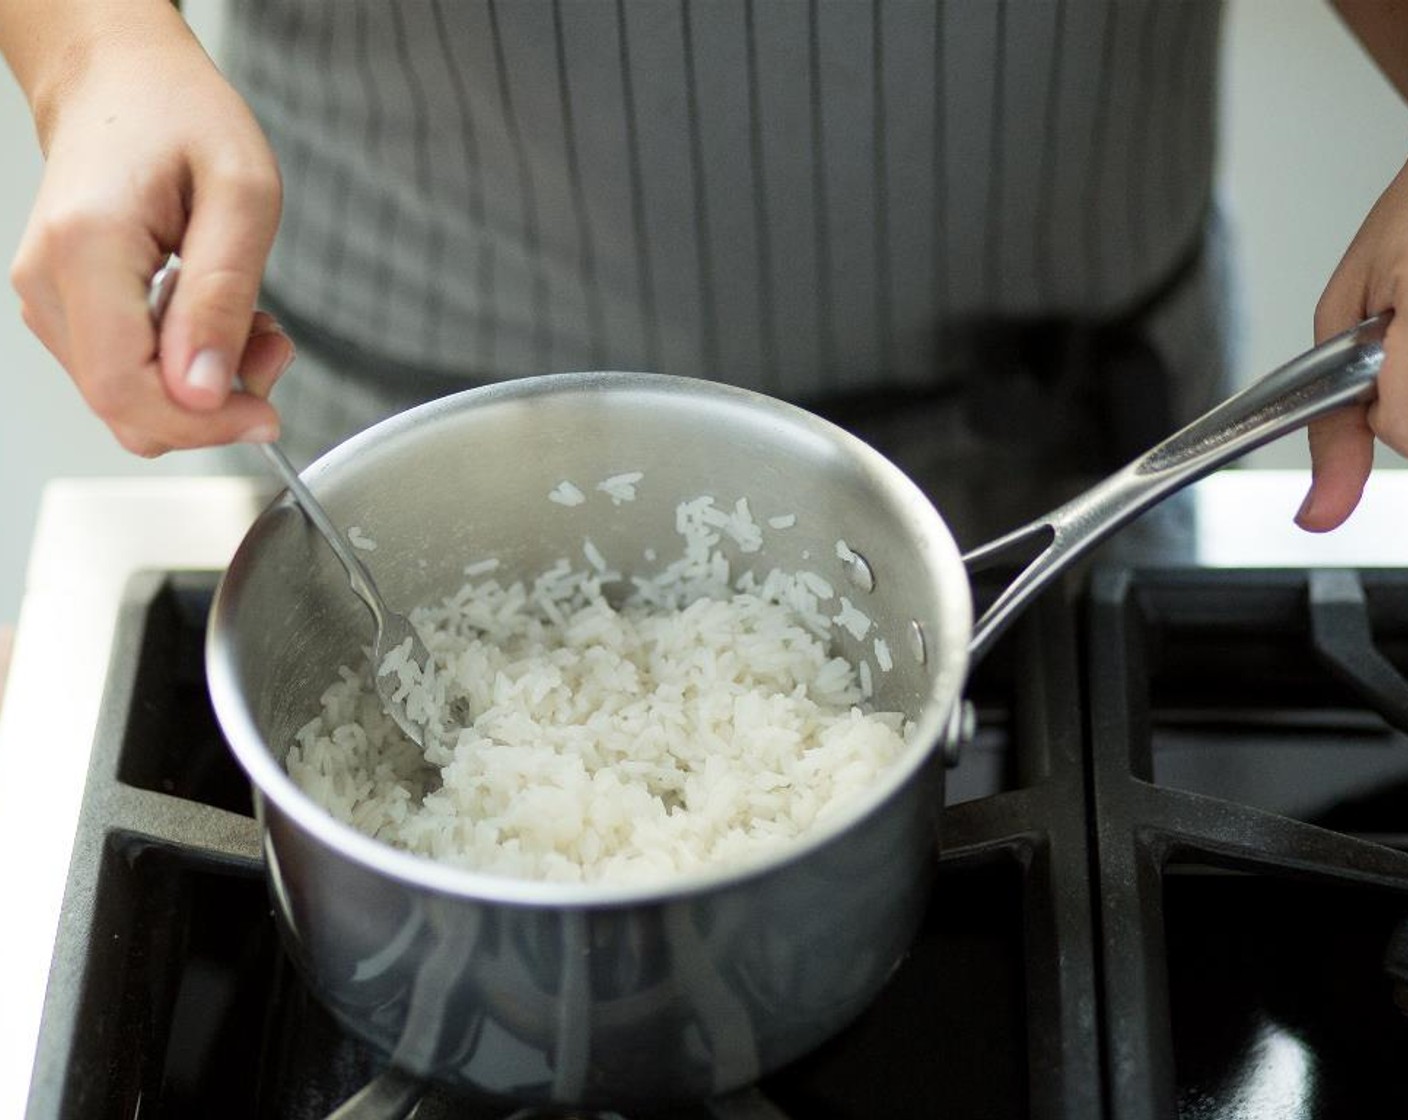 step 1 Bring the Jasmine Rice (2/3 cup) and Water (1 cup)  to a boil in a small sauce pot over medium-high heat. Stir, reduce heat to low, cover and simmer for 15 minutes. Fluff with a fork, cover again and keep warm for plating.